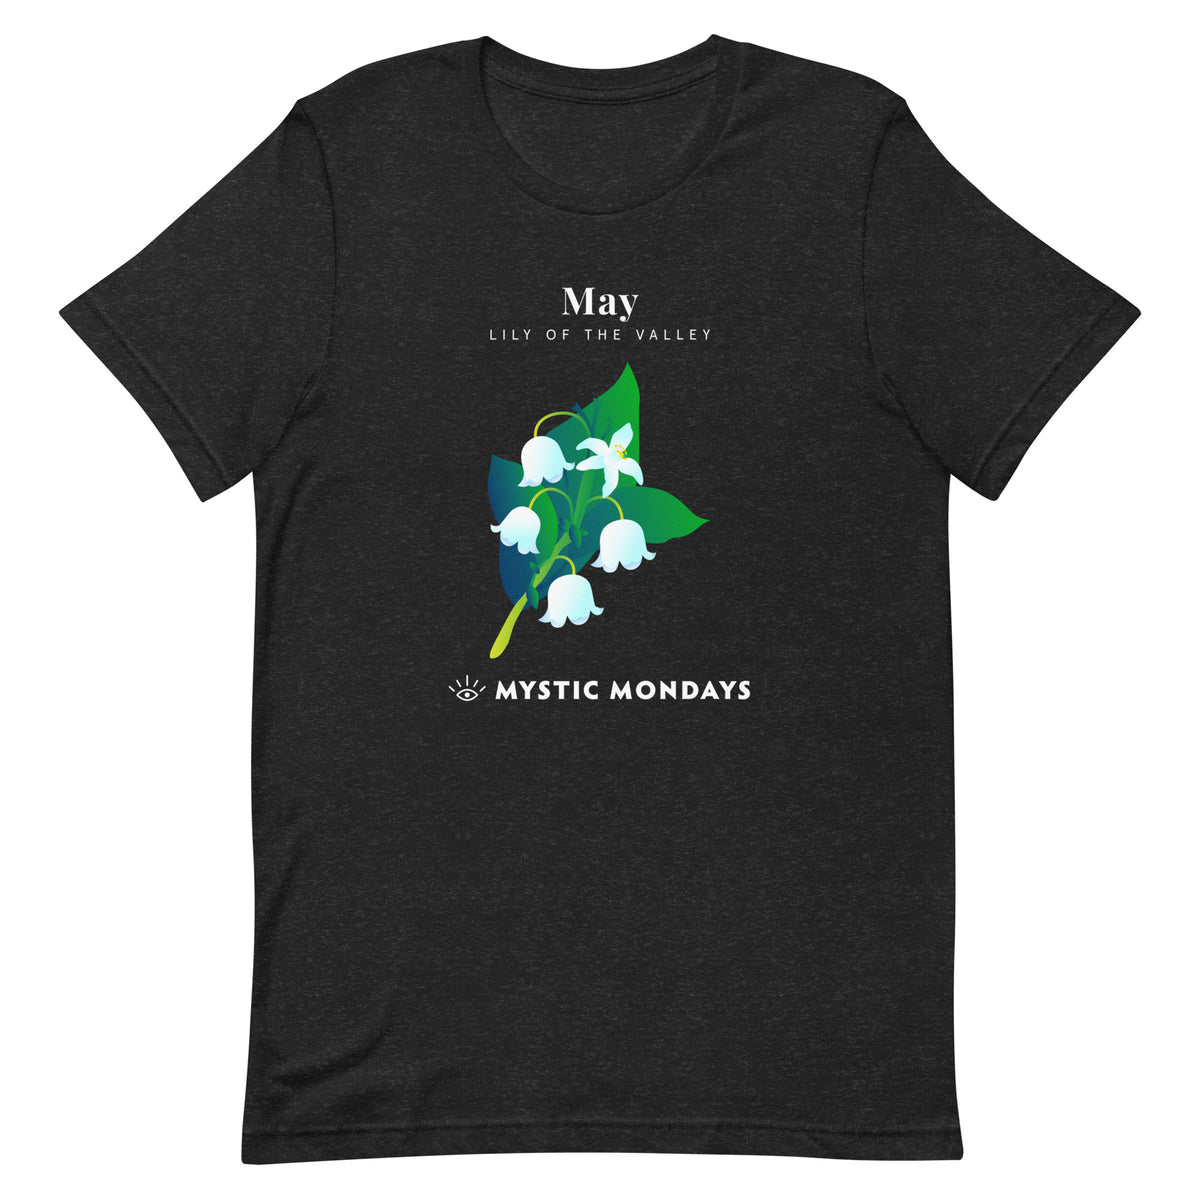 Lily of the Valley T-shirt